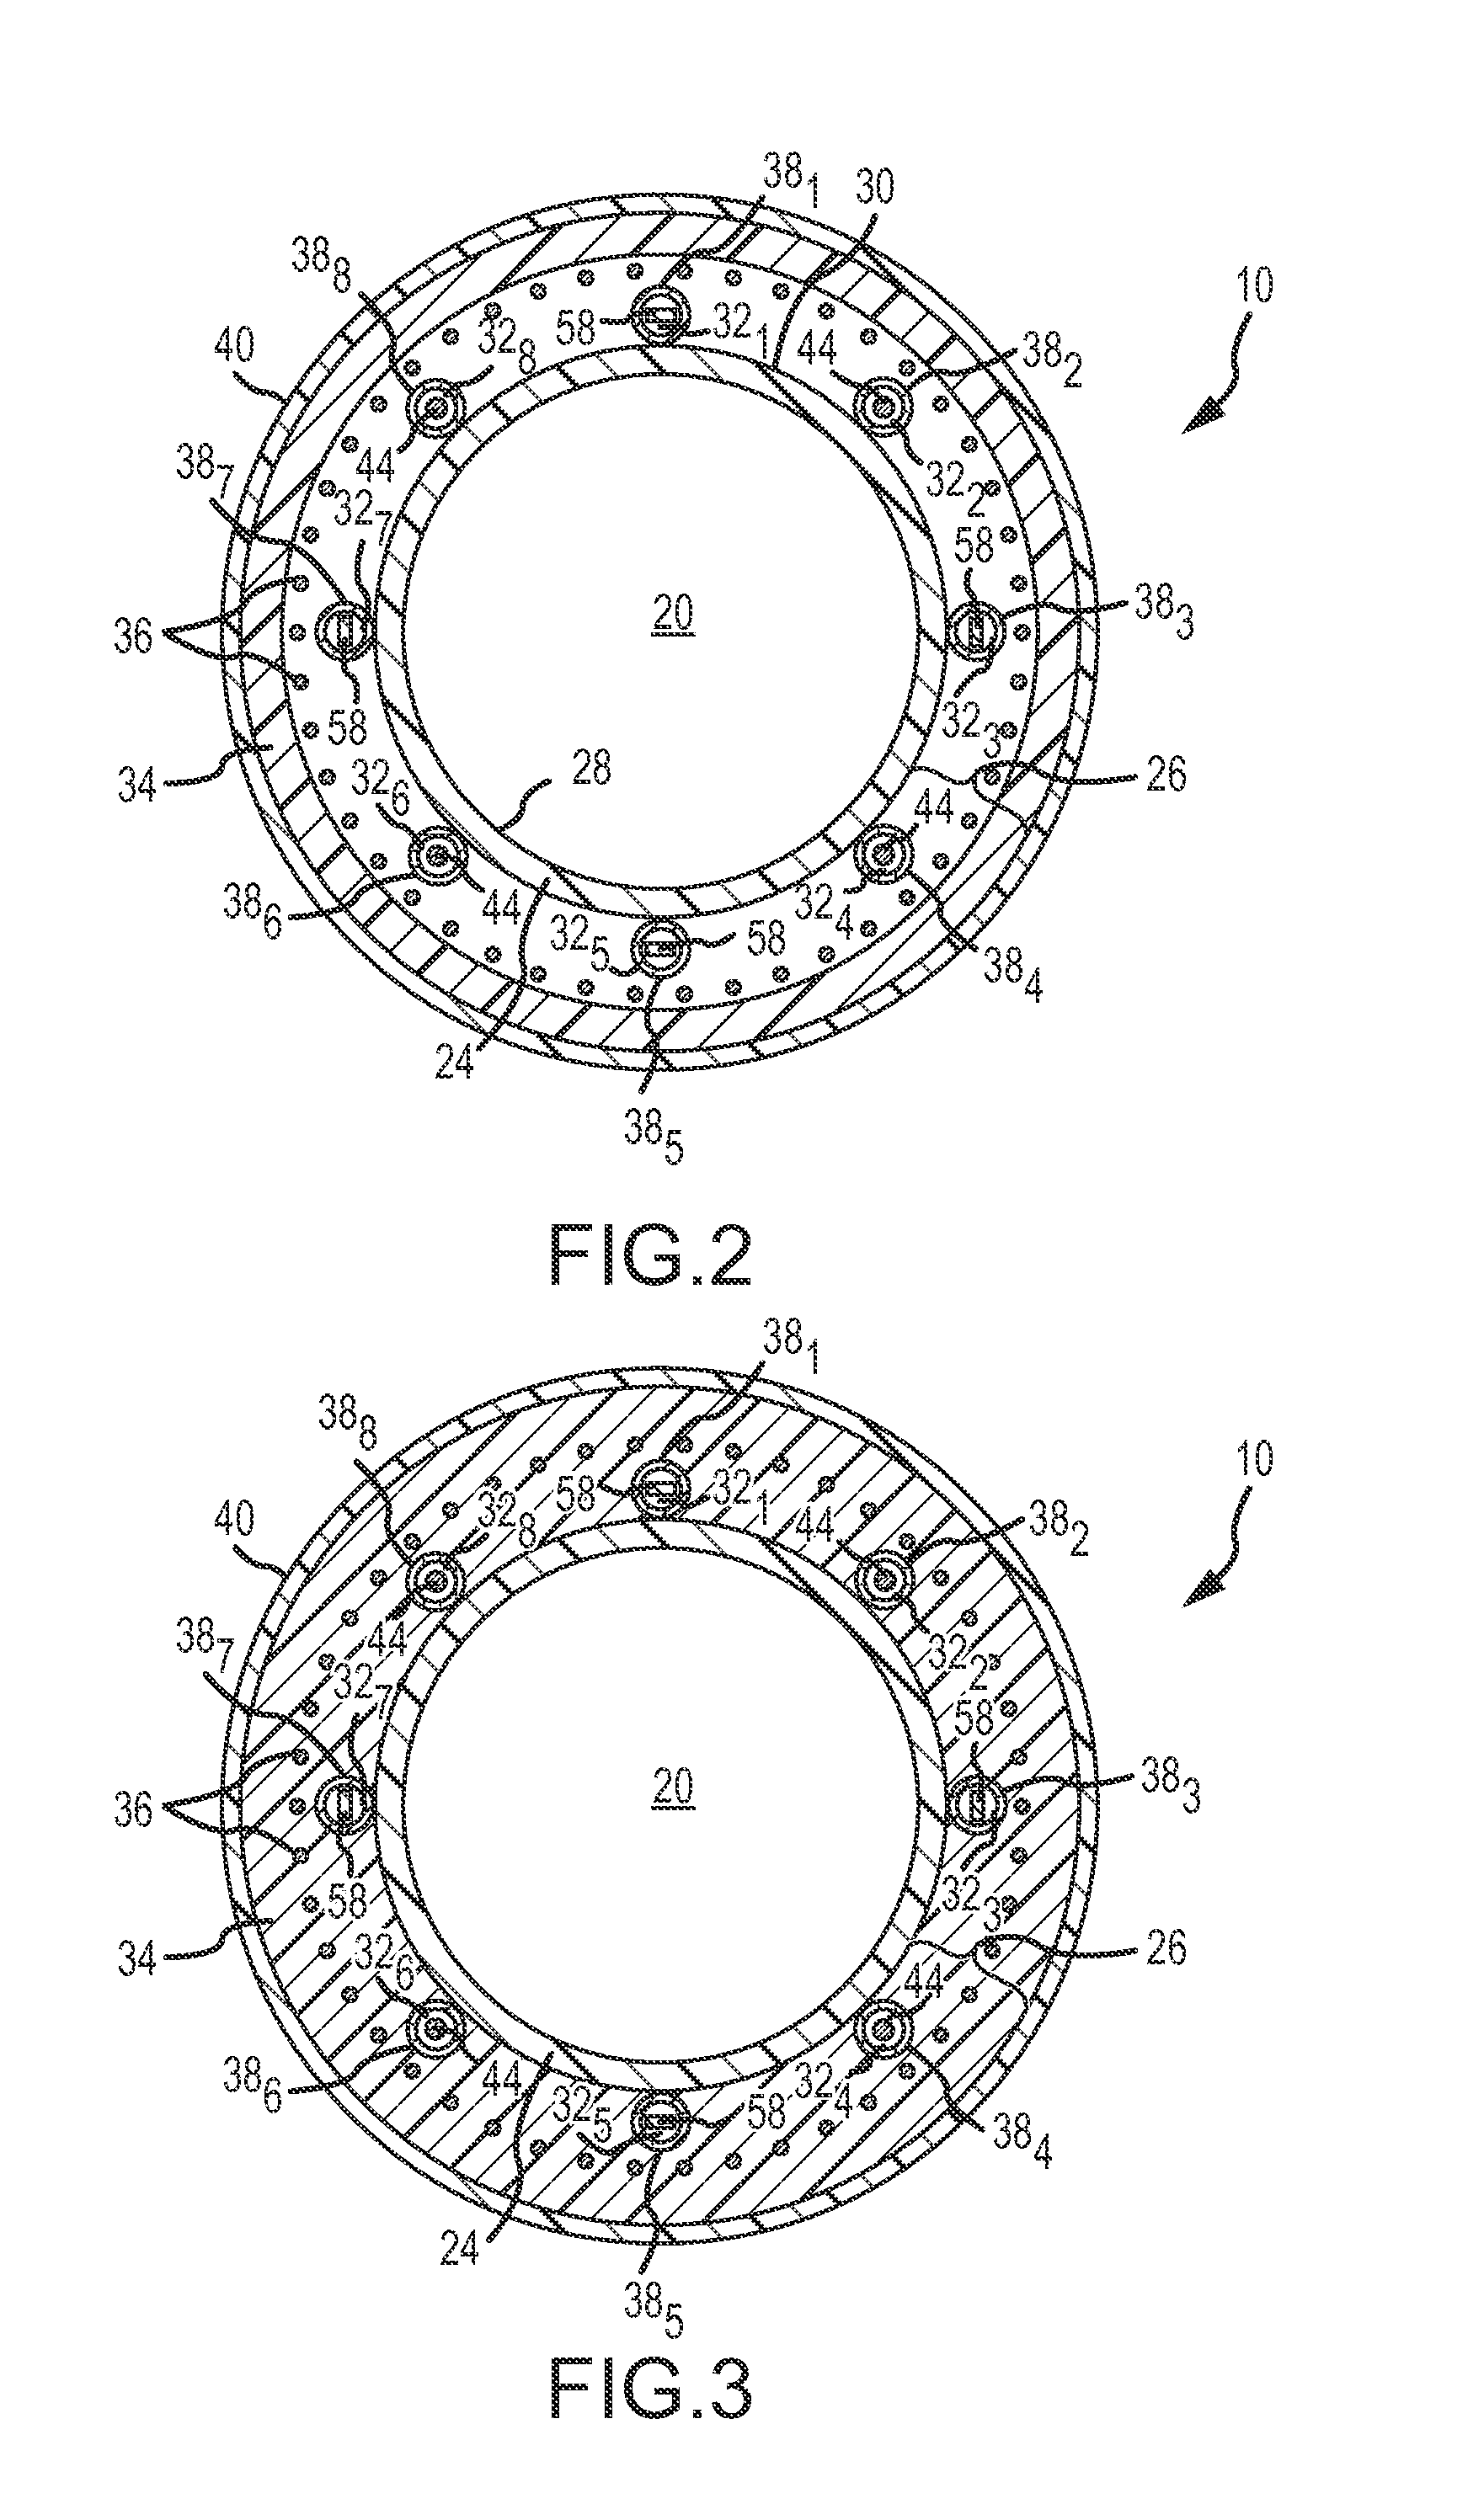 Medical devices having an electroanatomical system imaging element mounted thereon